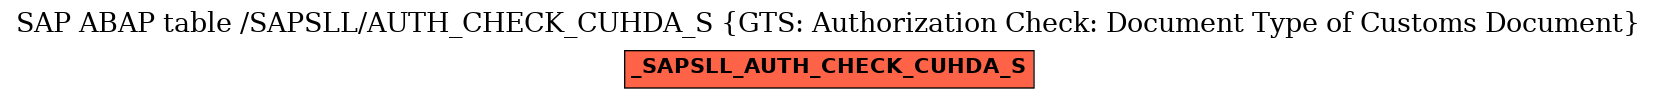 E-R Diagram for table /SAPSLL/AUTH_CHECK_CUHDA_S (GTS: Authorization Check: Document Type of Customs Document)